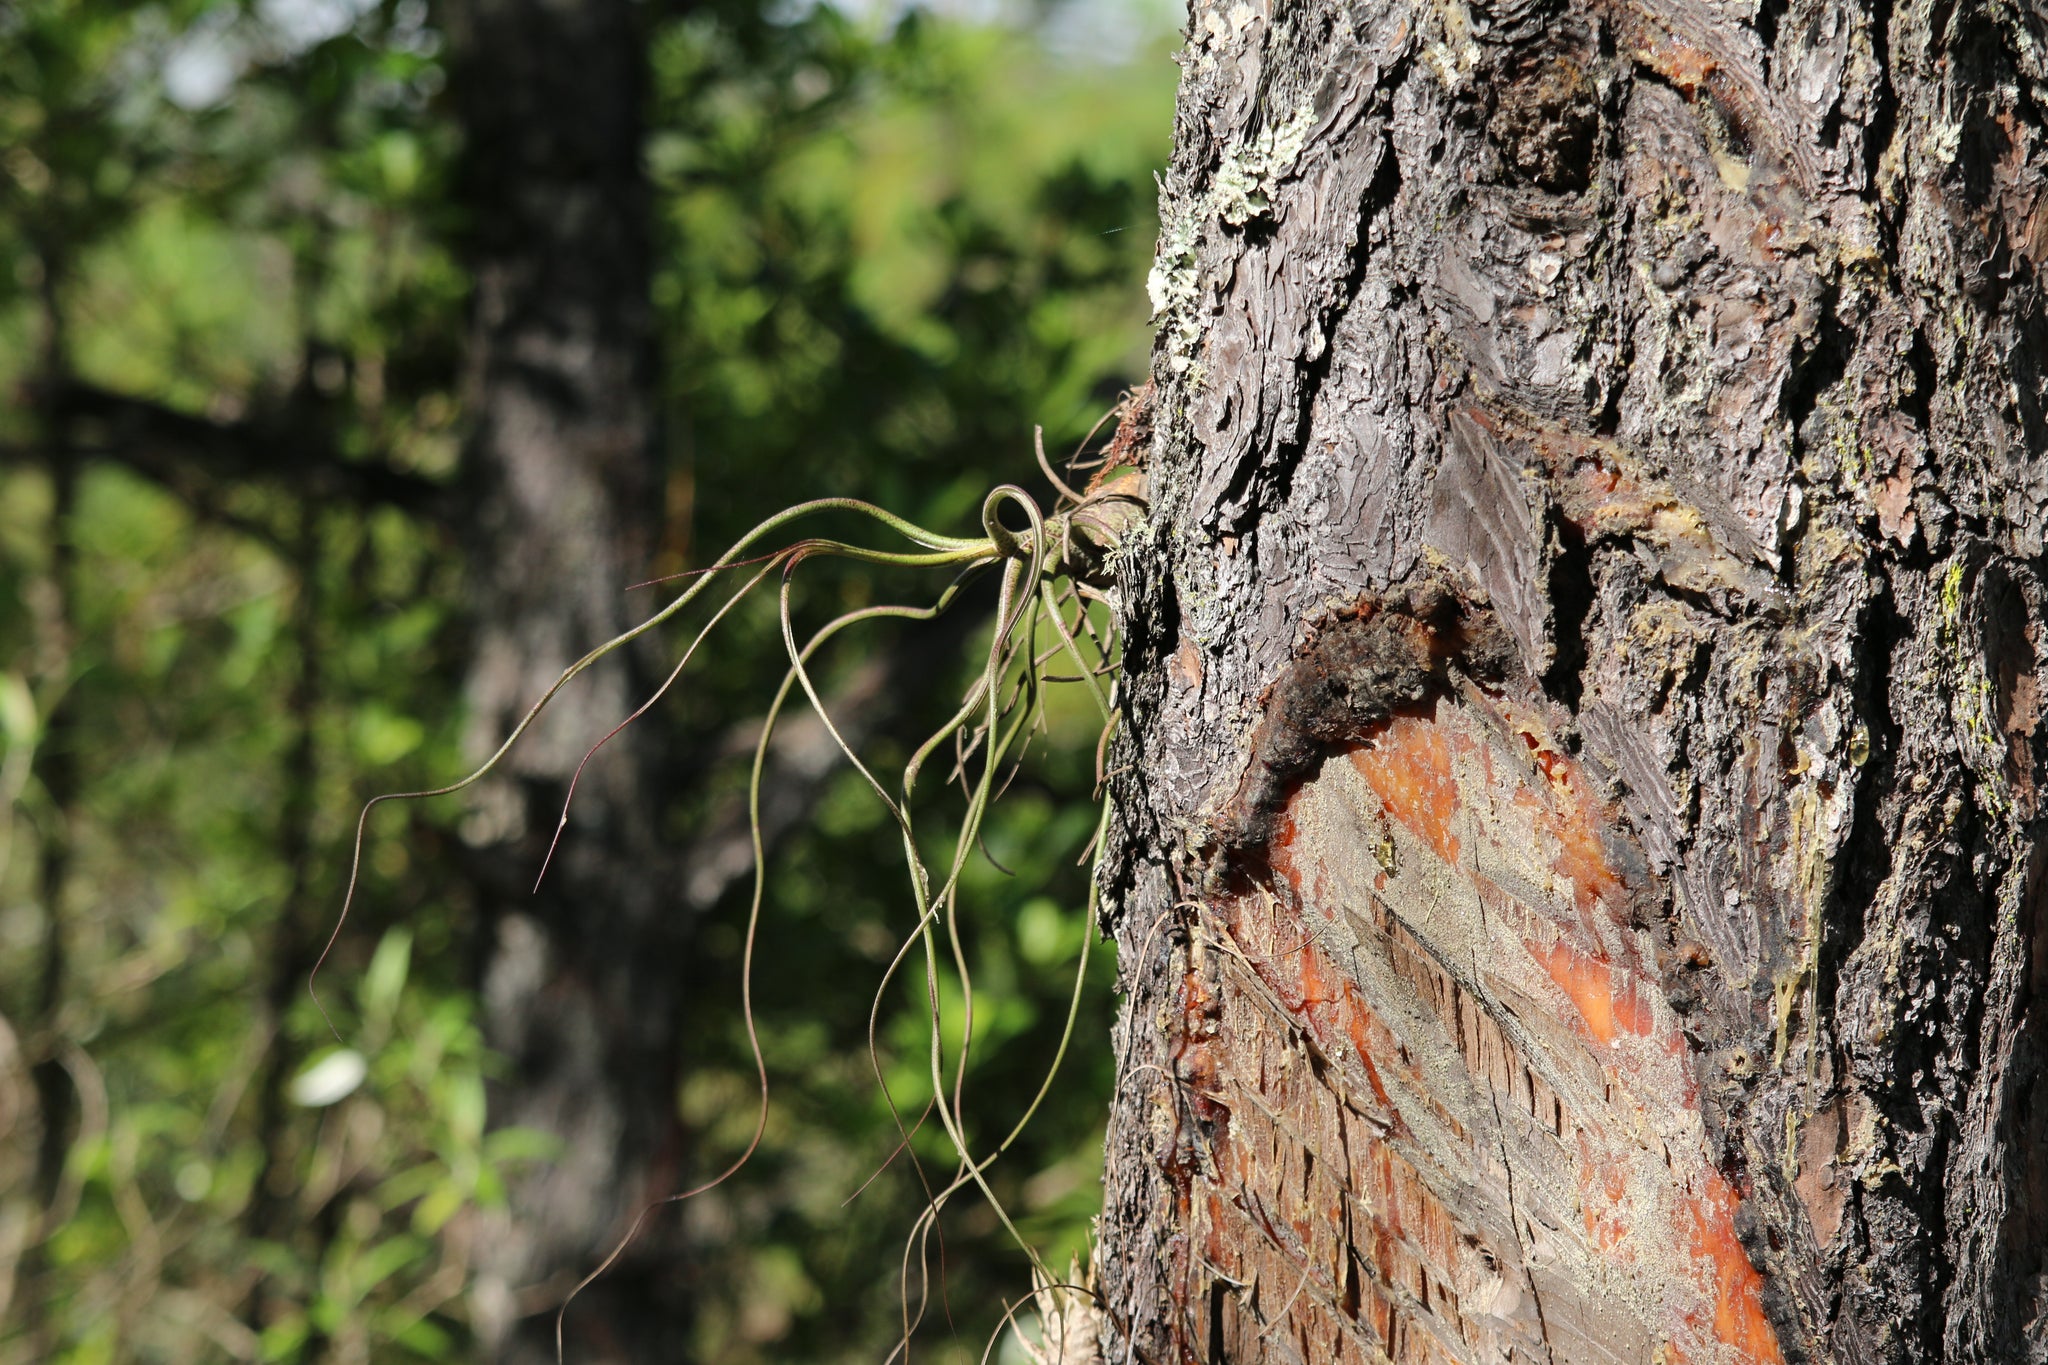 A nicely speckled Tillandsia Butzii growing exposed on the side of a Pine.